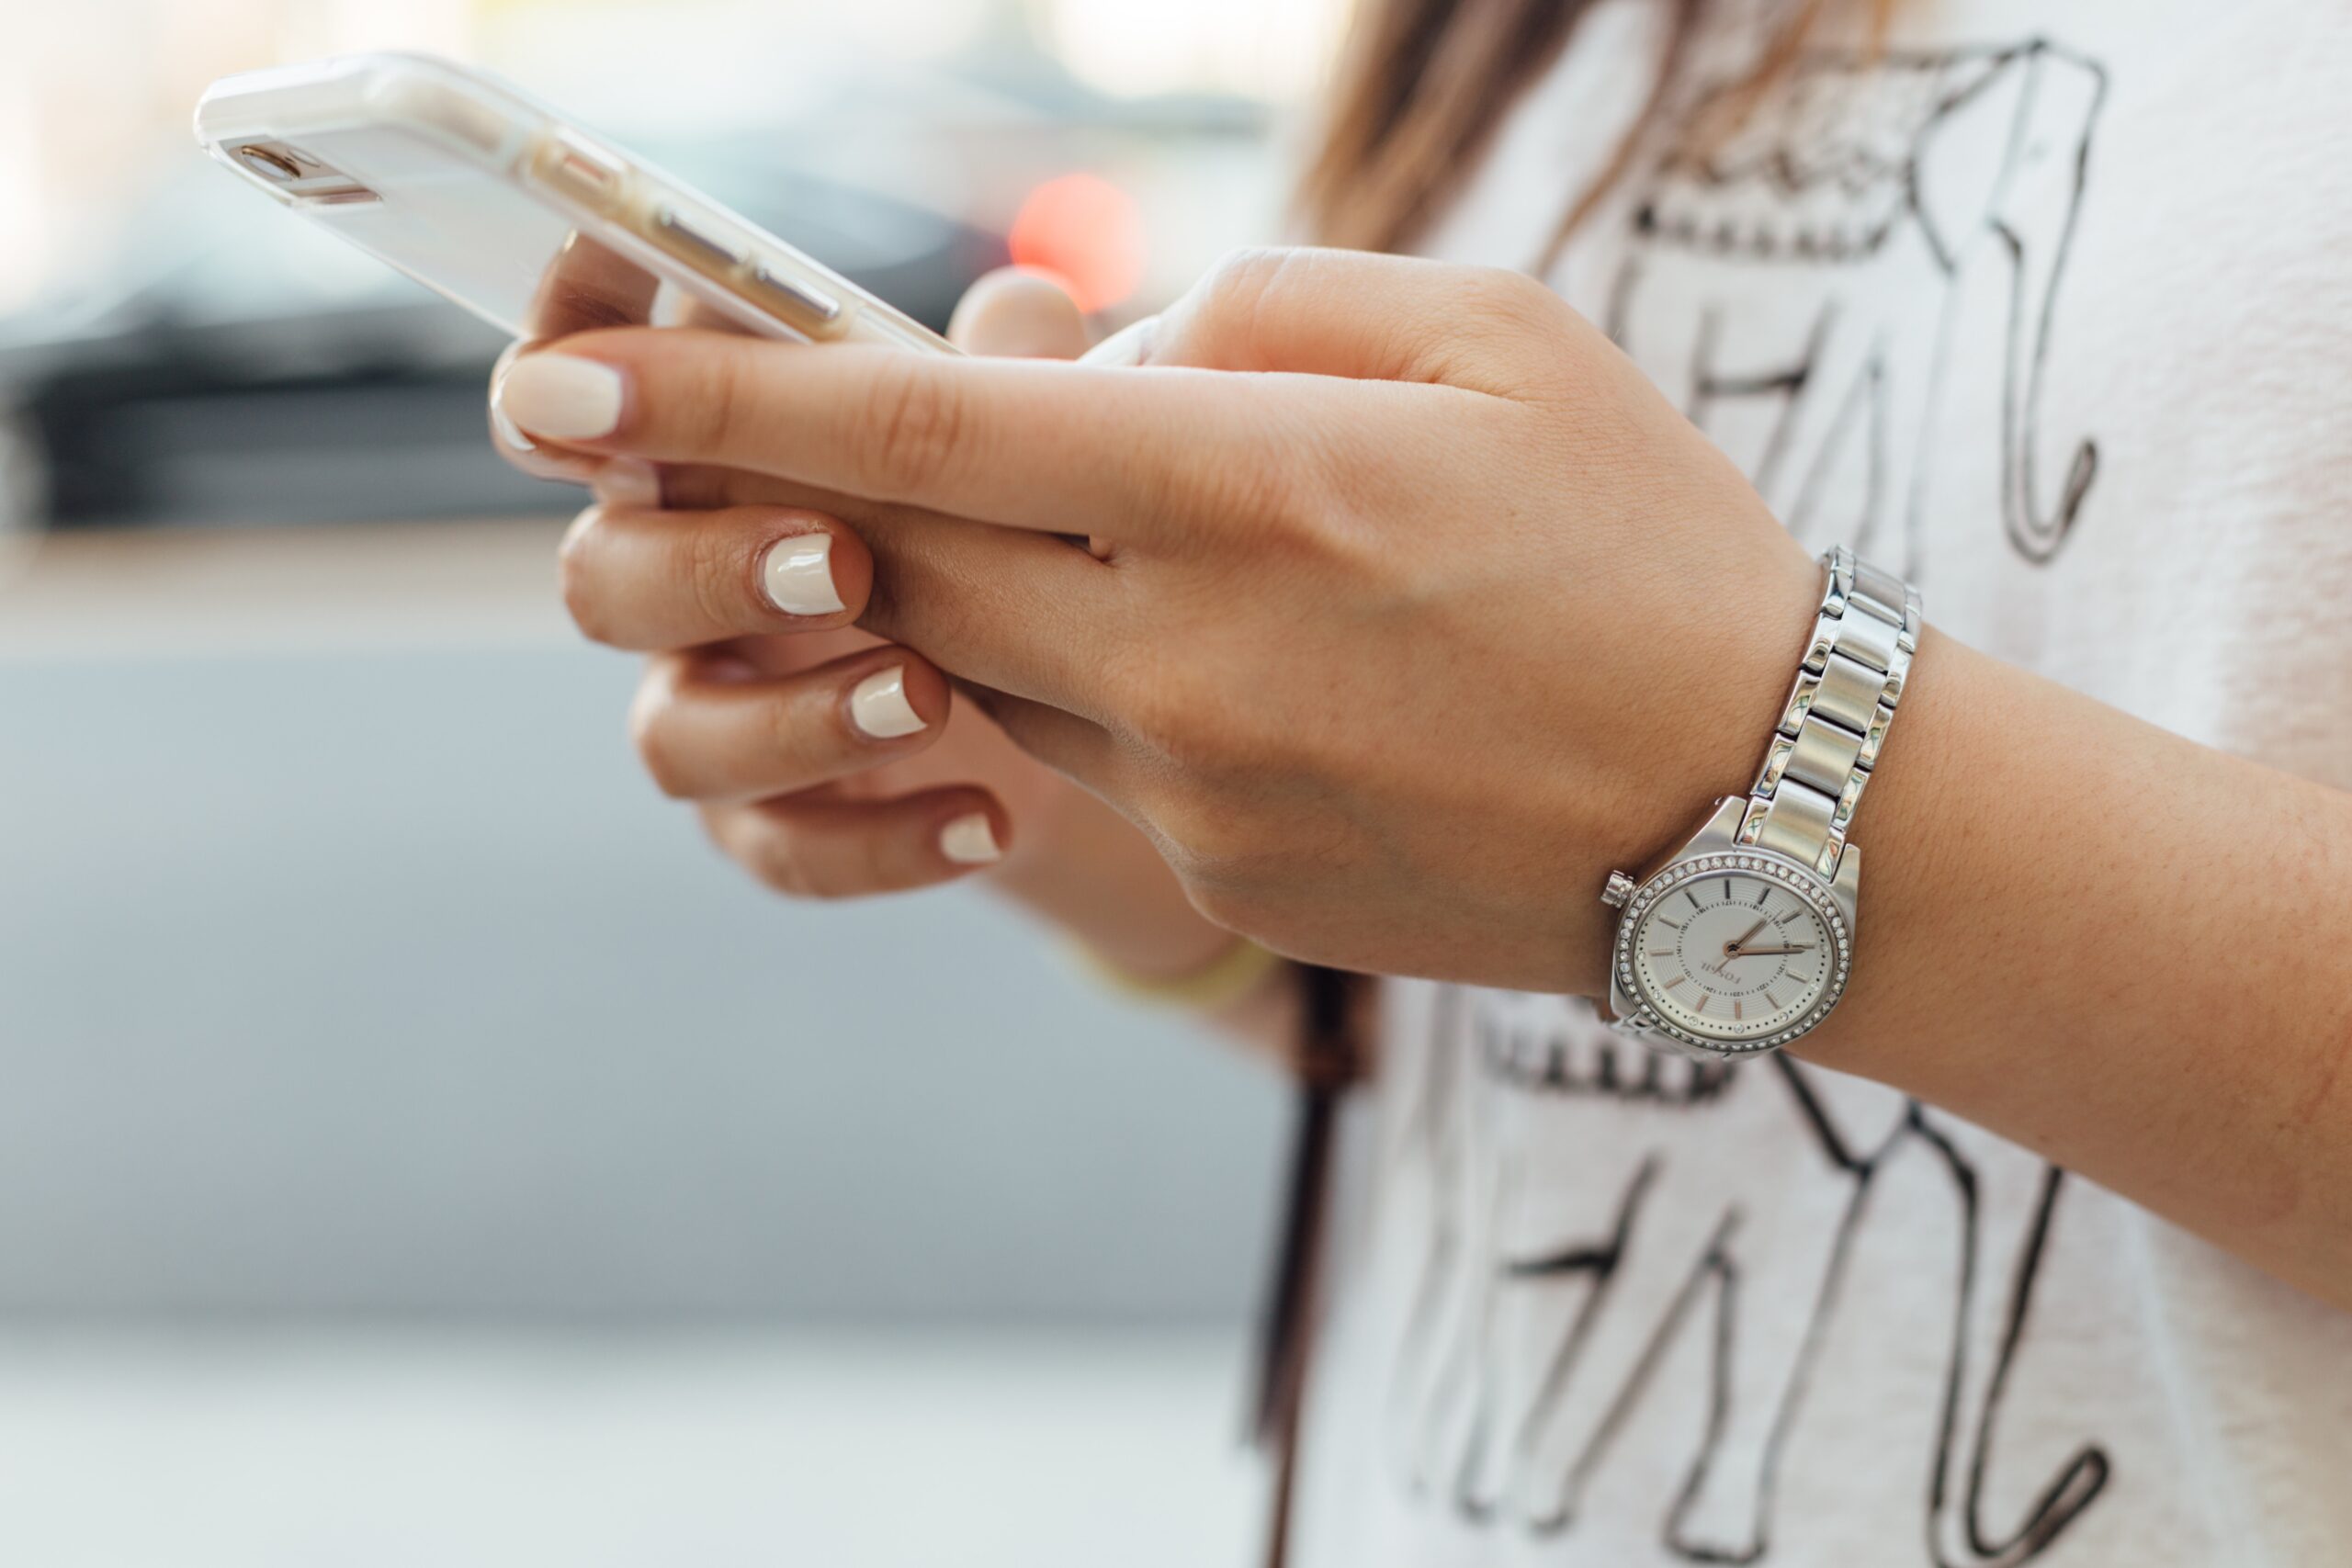 close up photo of woman wearing watch holding a mobile device in her hands